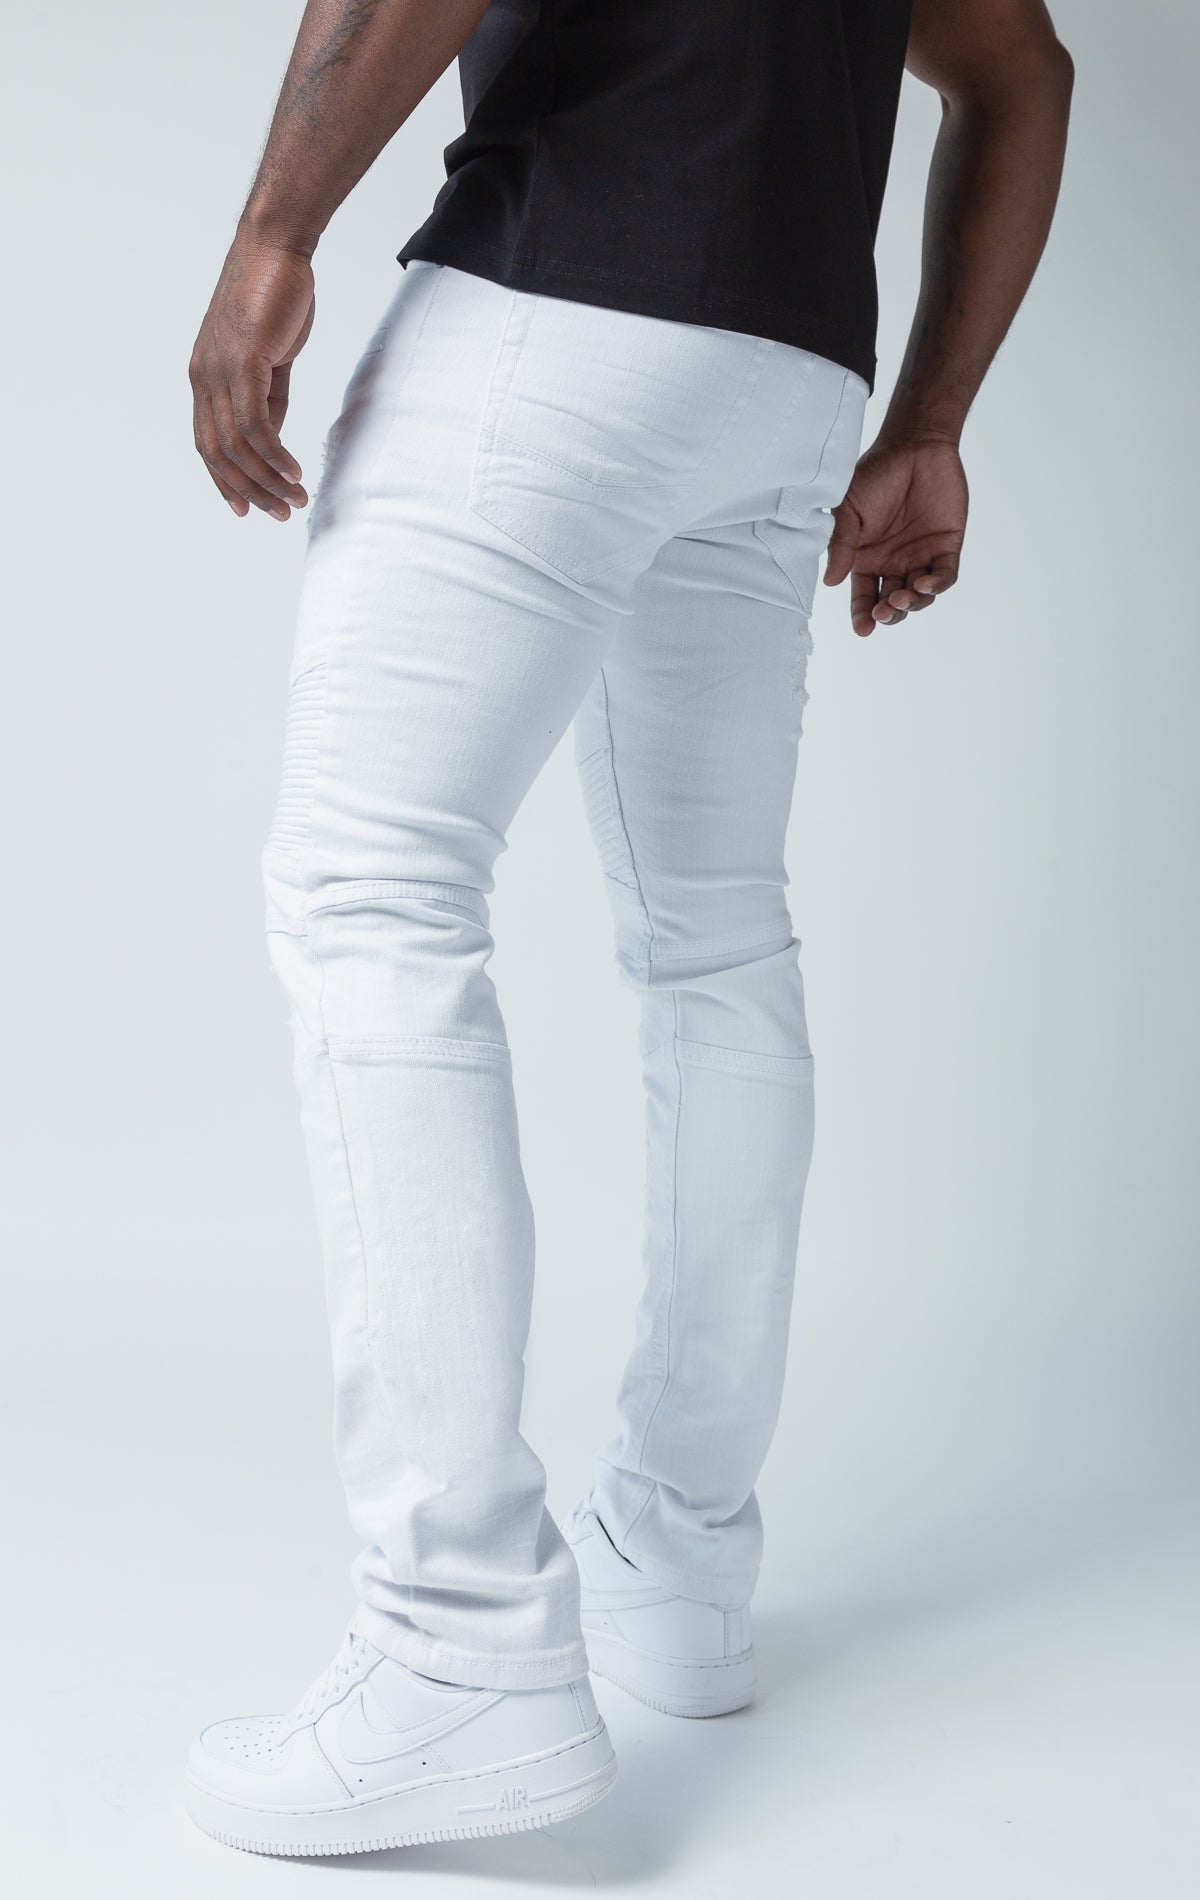 White high-quality denim made from 98% cotton and 2% spandex. With its rip and repair design and slim fit, it's the ultimate blend of style and comfort.